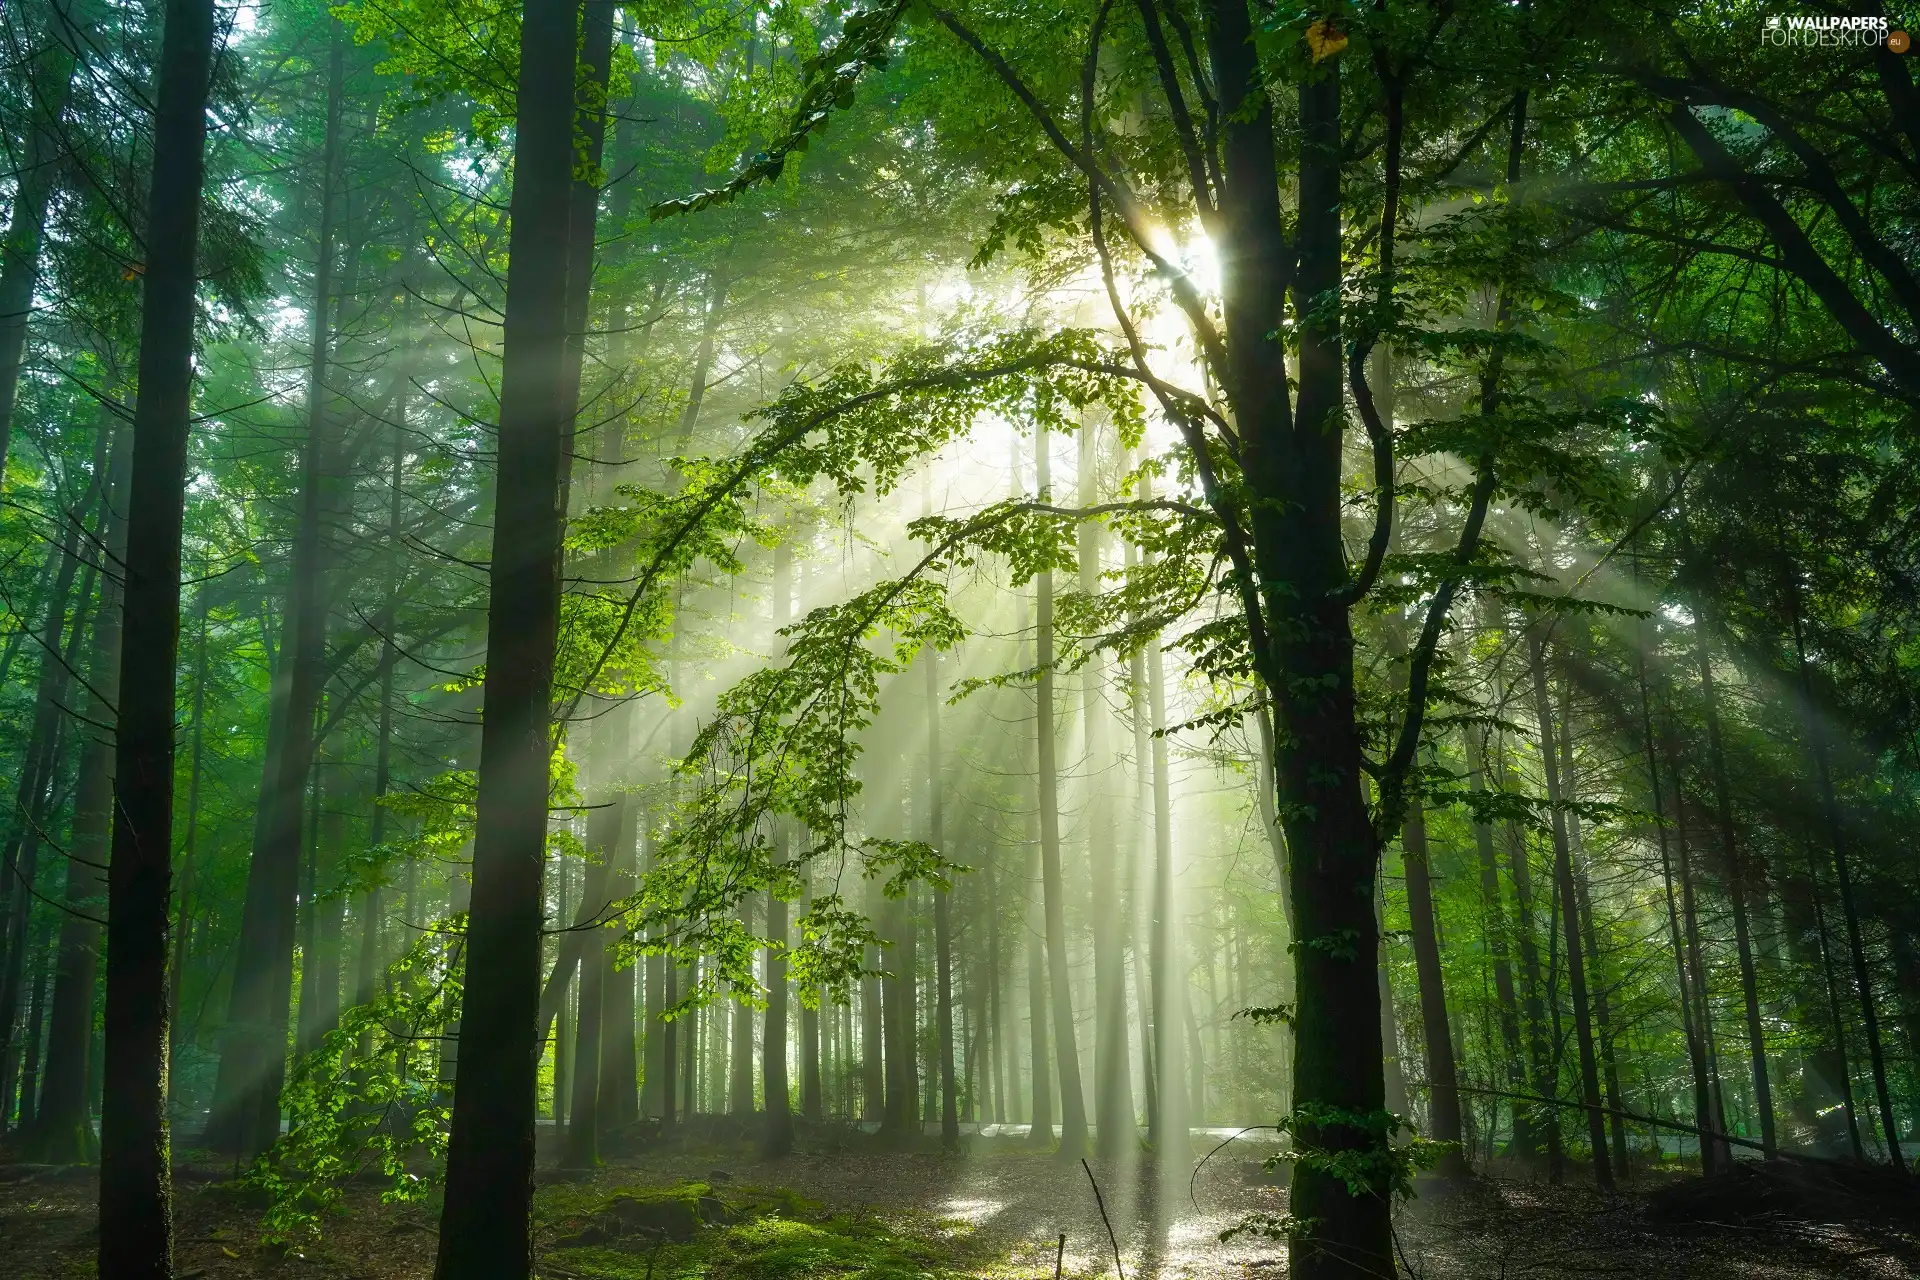 viewes, light breaking through sky, forest, trees, illuminated